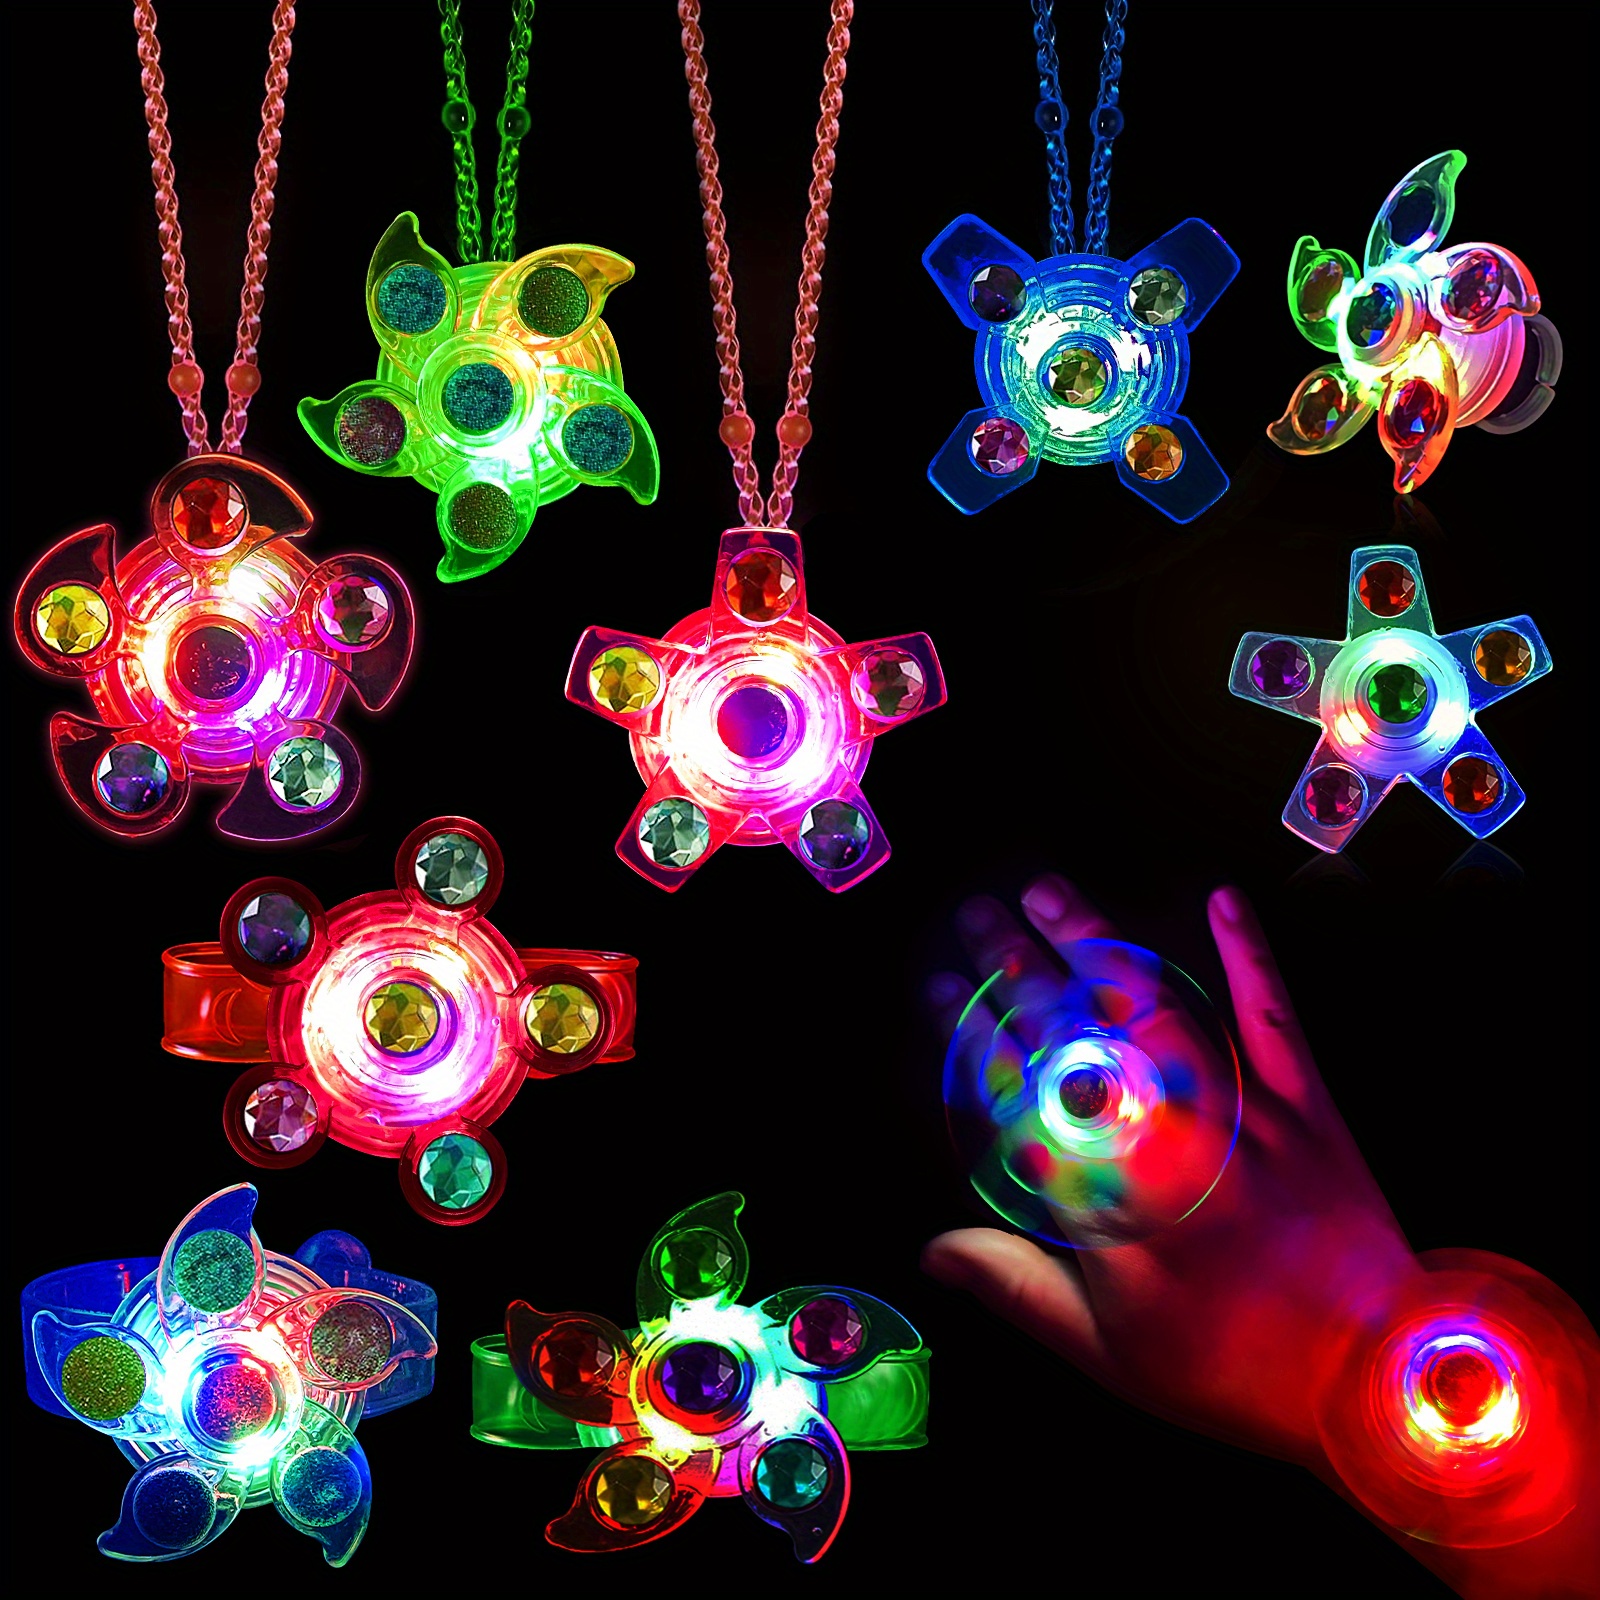 Gigilli Fidget Spinners 12 Pack, Party Favors LED Light Up Bulk Fidget  Spinners, Valentines Day Gift Kids Fidget Toy Goodie Bag Stuffers, Glow in  The